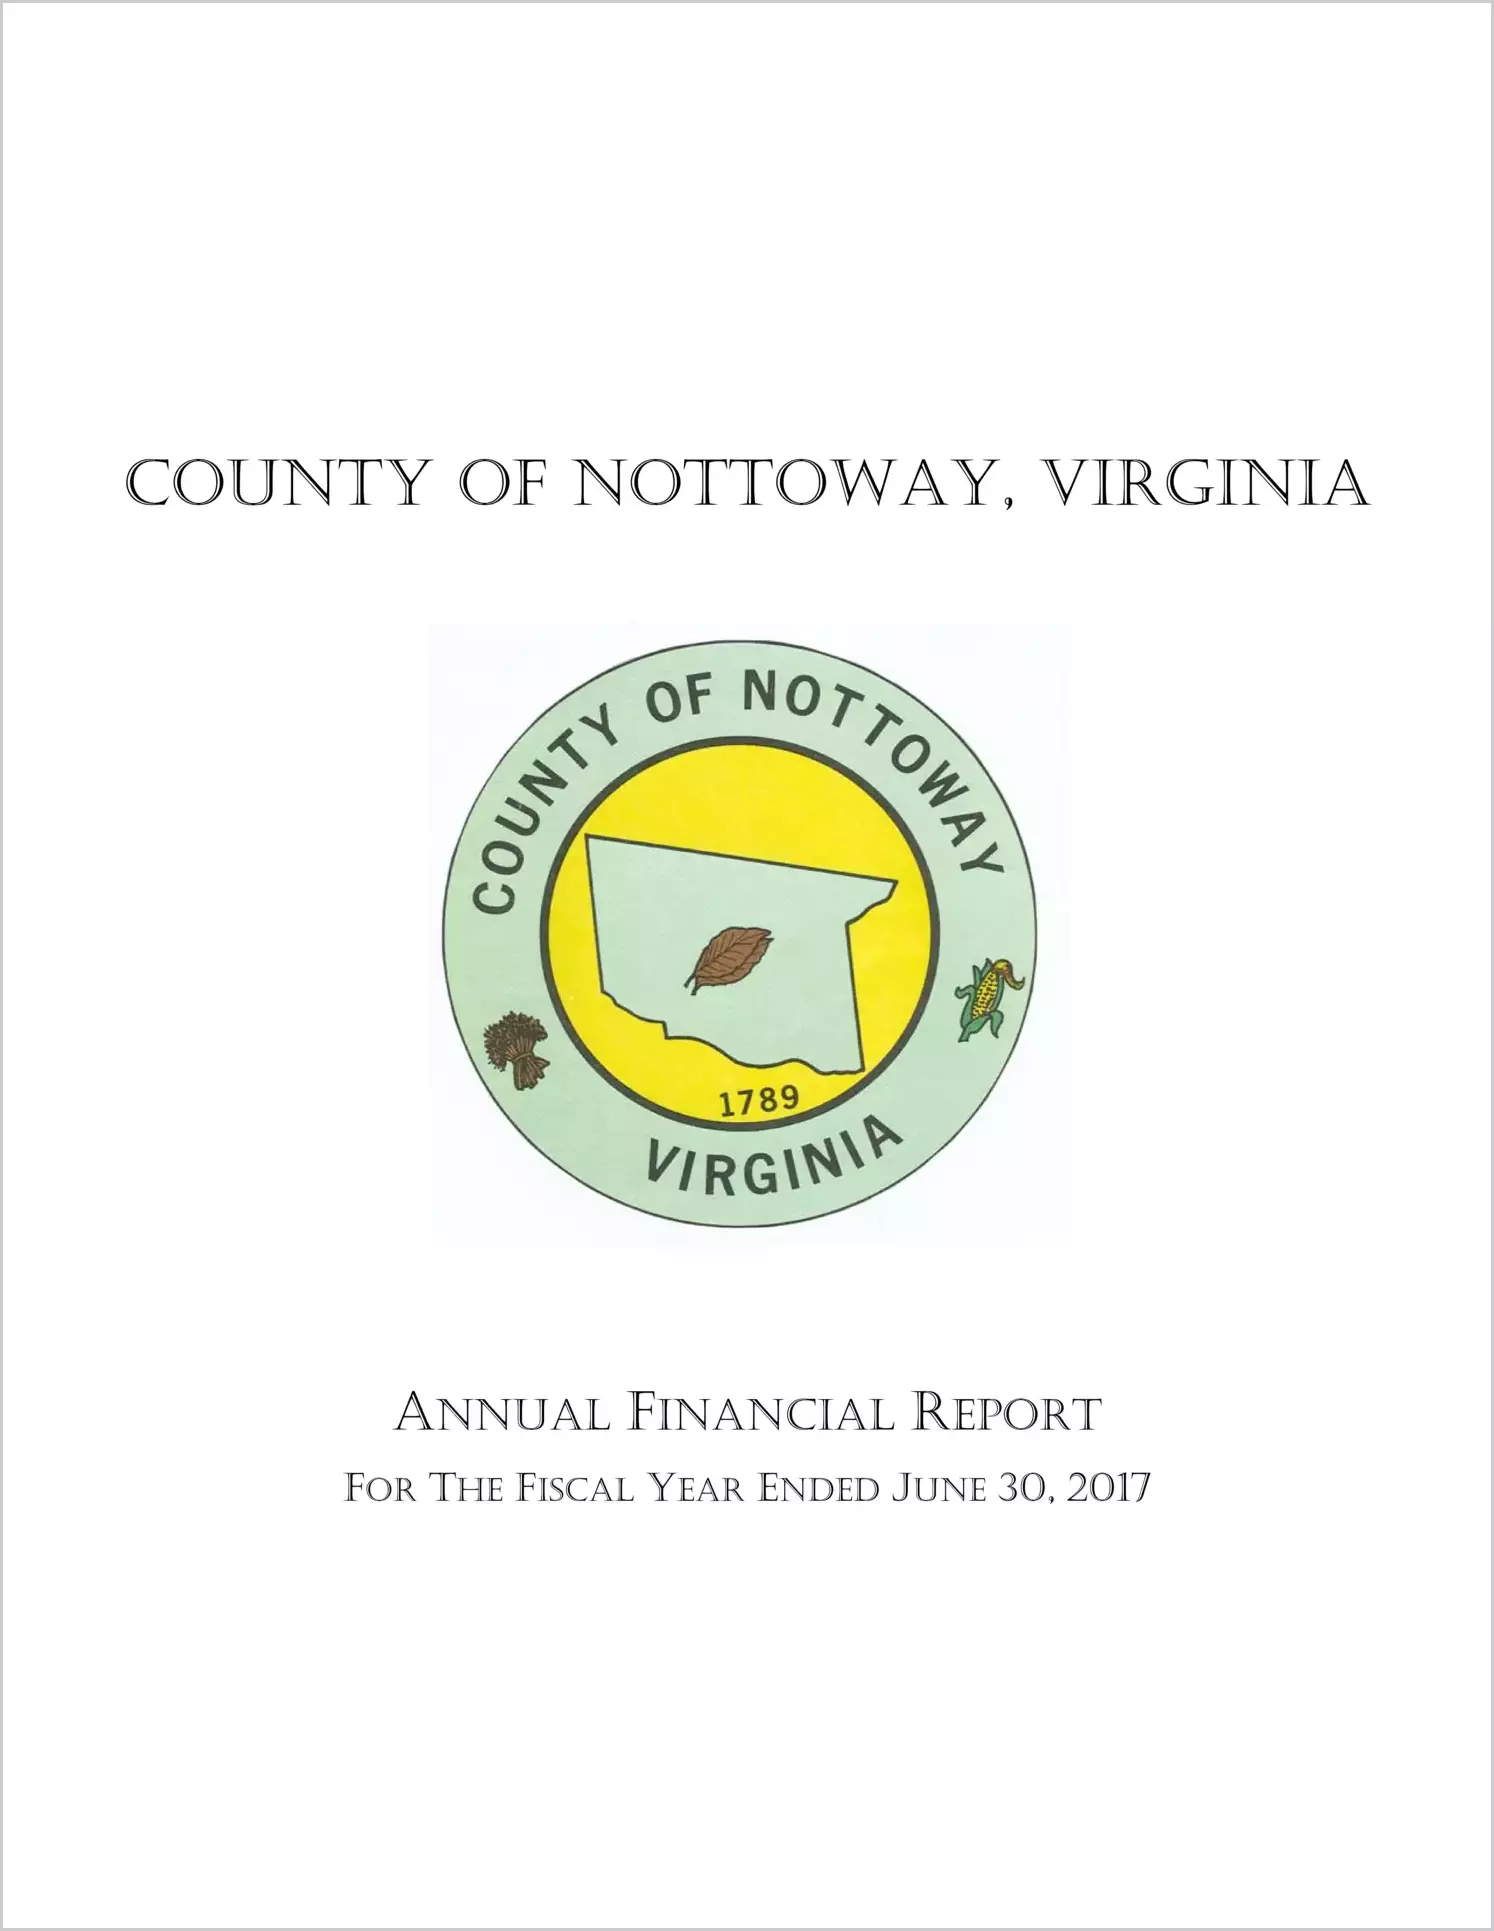 2017 Annual Financial Report for County of Nottoway